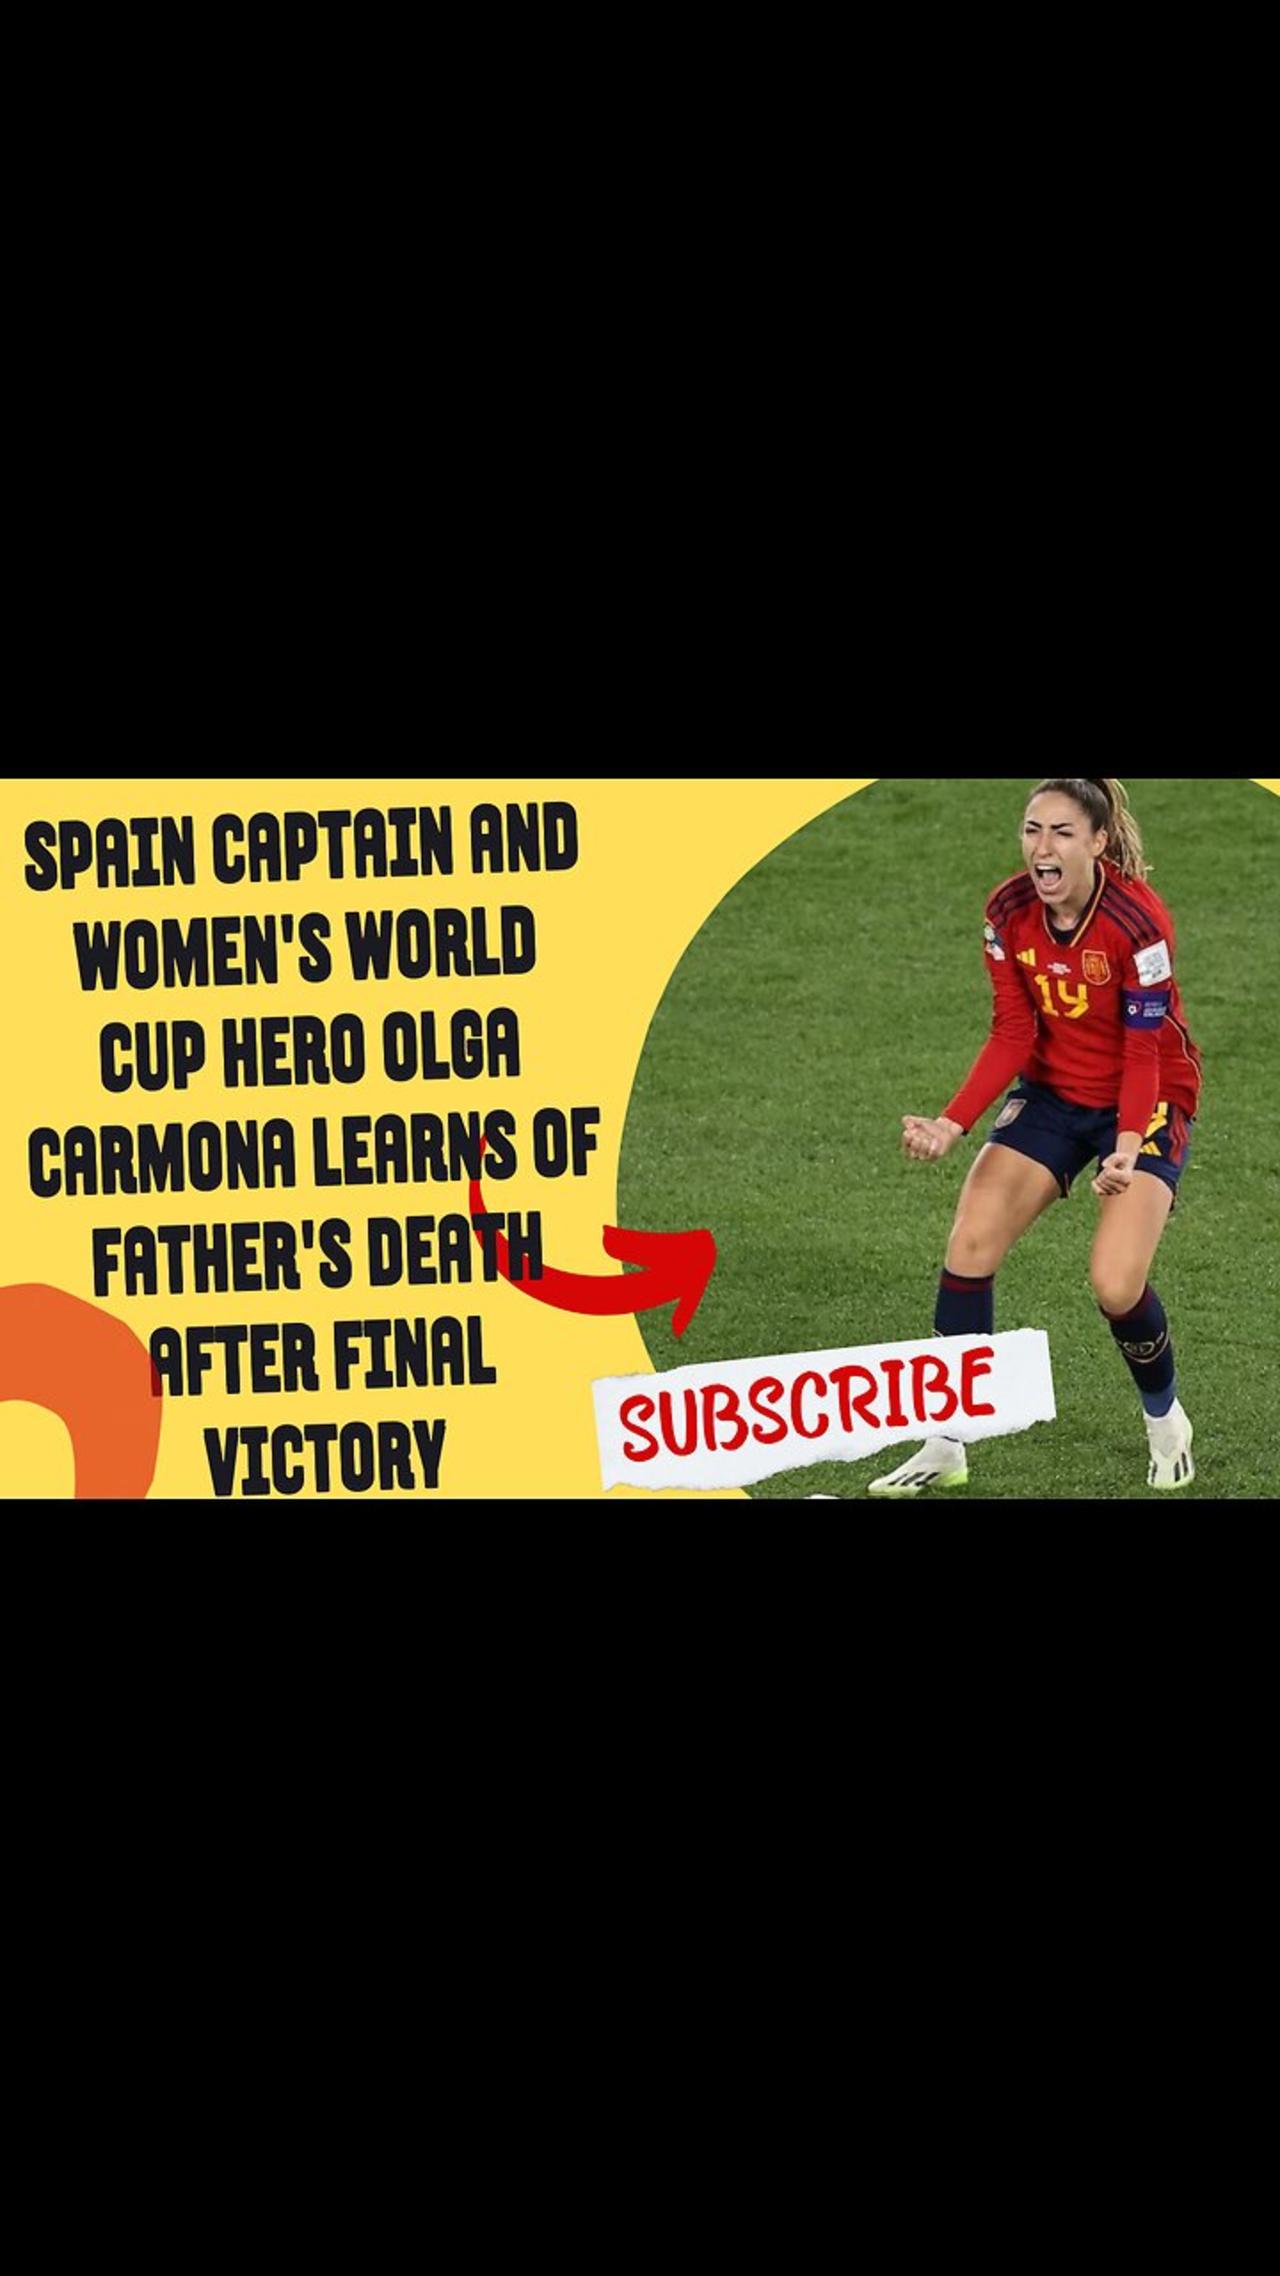 Spain captain and Women's World Cup hero Olga Carmona learns of father's death after final victory